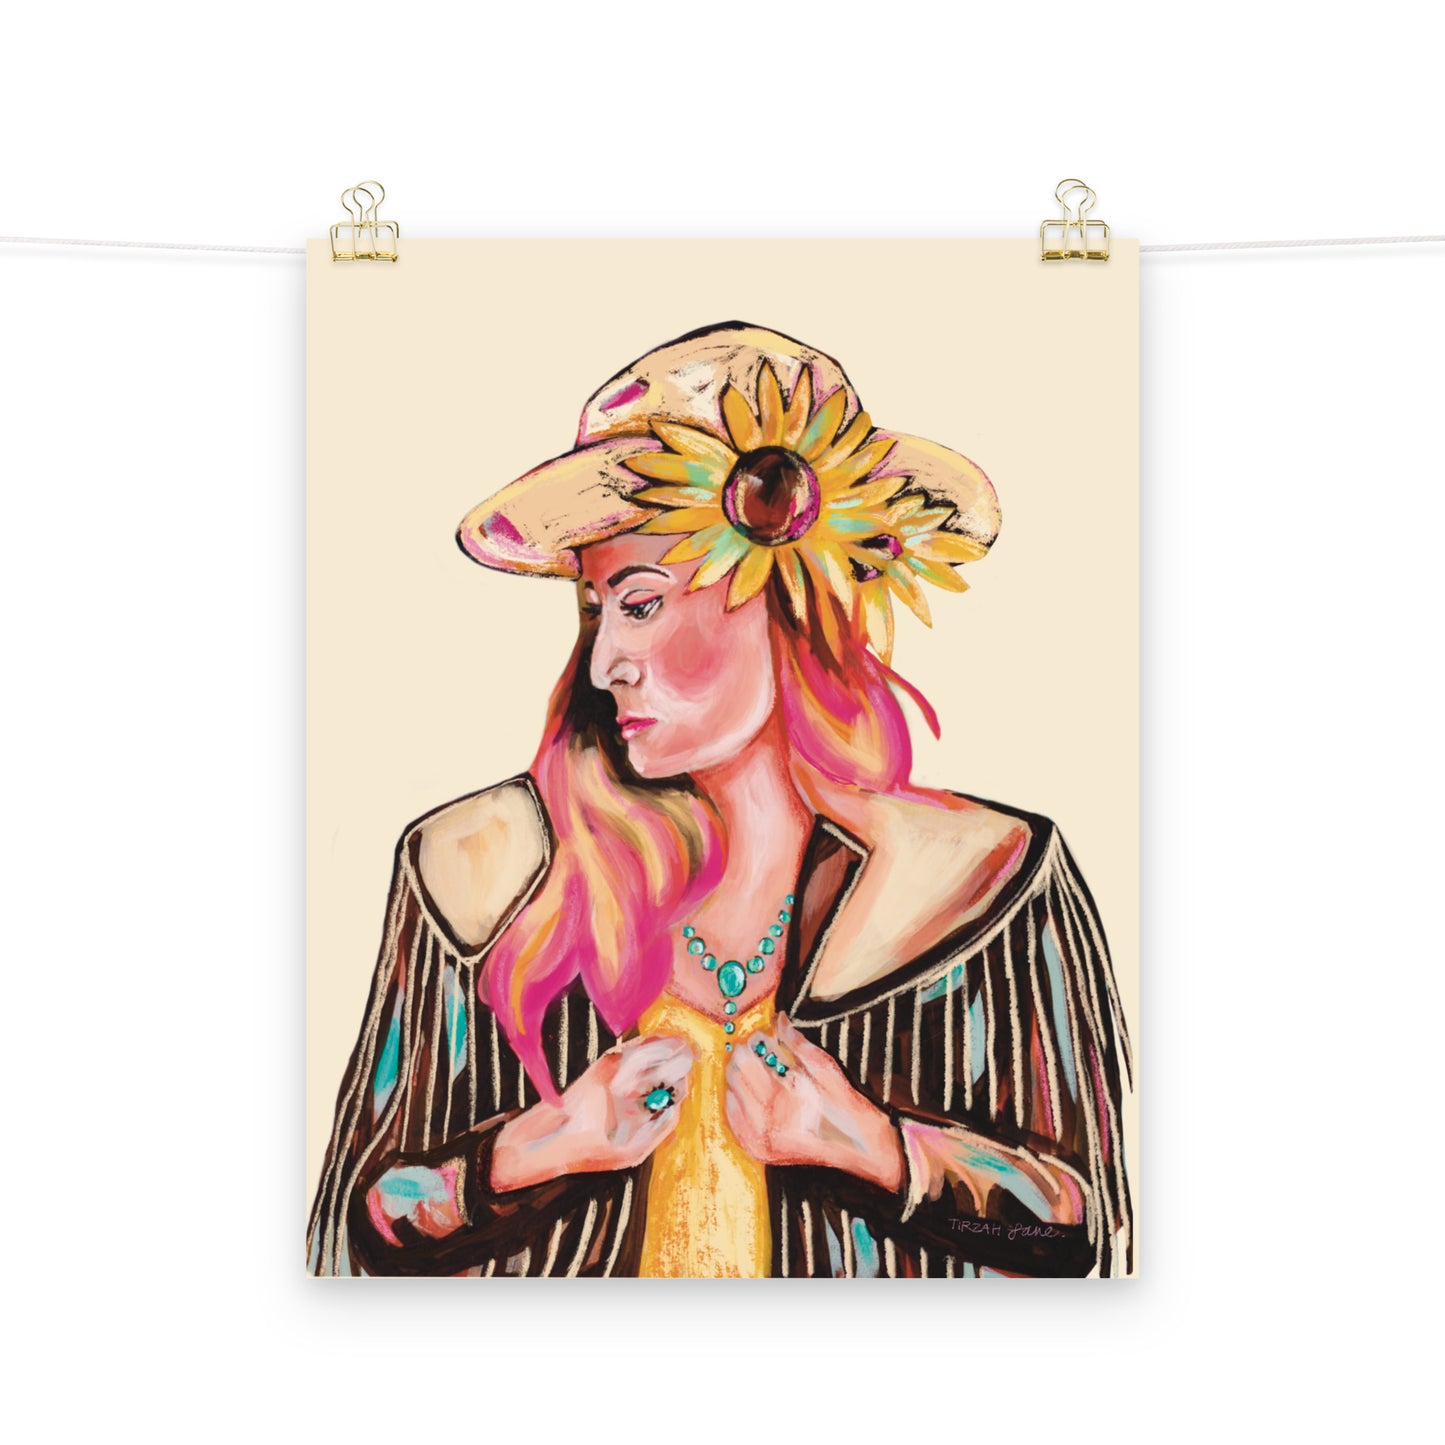 Western Cowgirl Floral Sunflower Portrait Painting Art Print